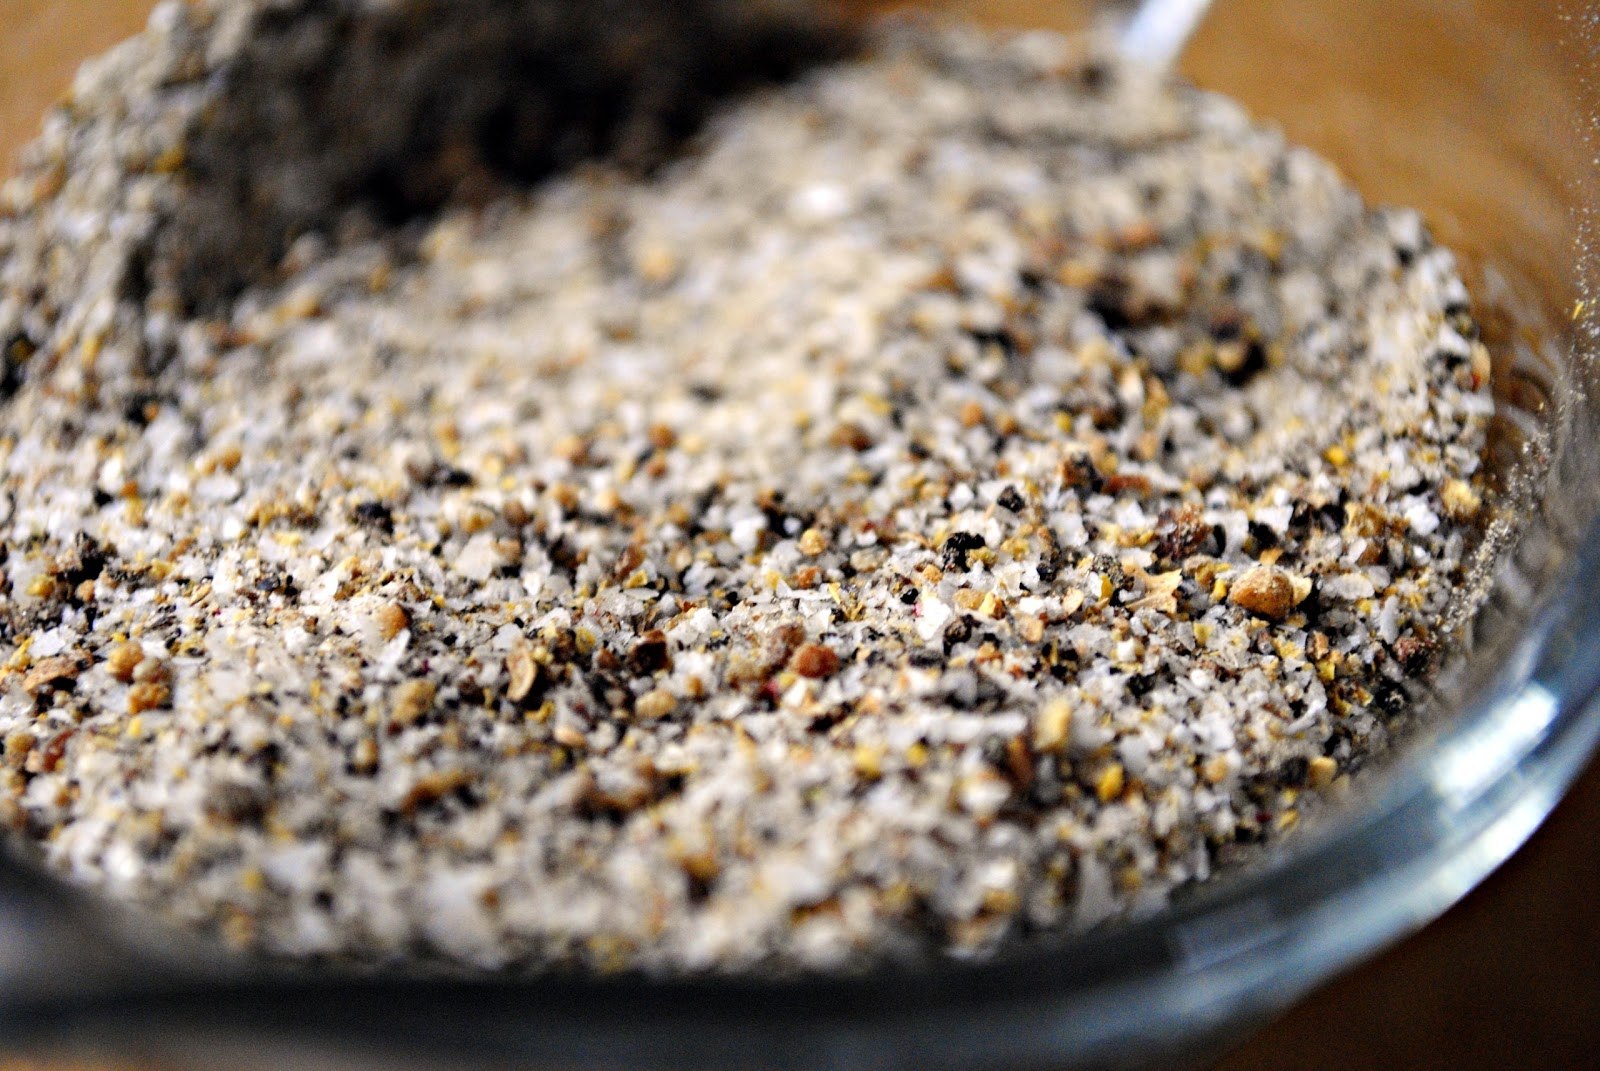 What Spices are in Salt And Pepper Seasoning 